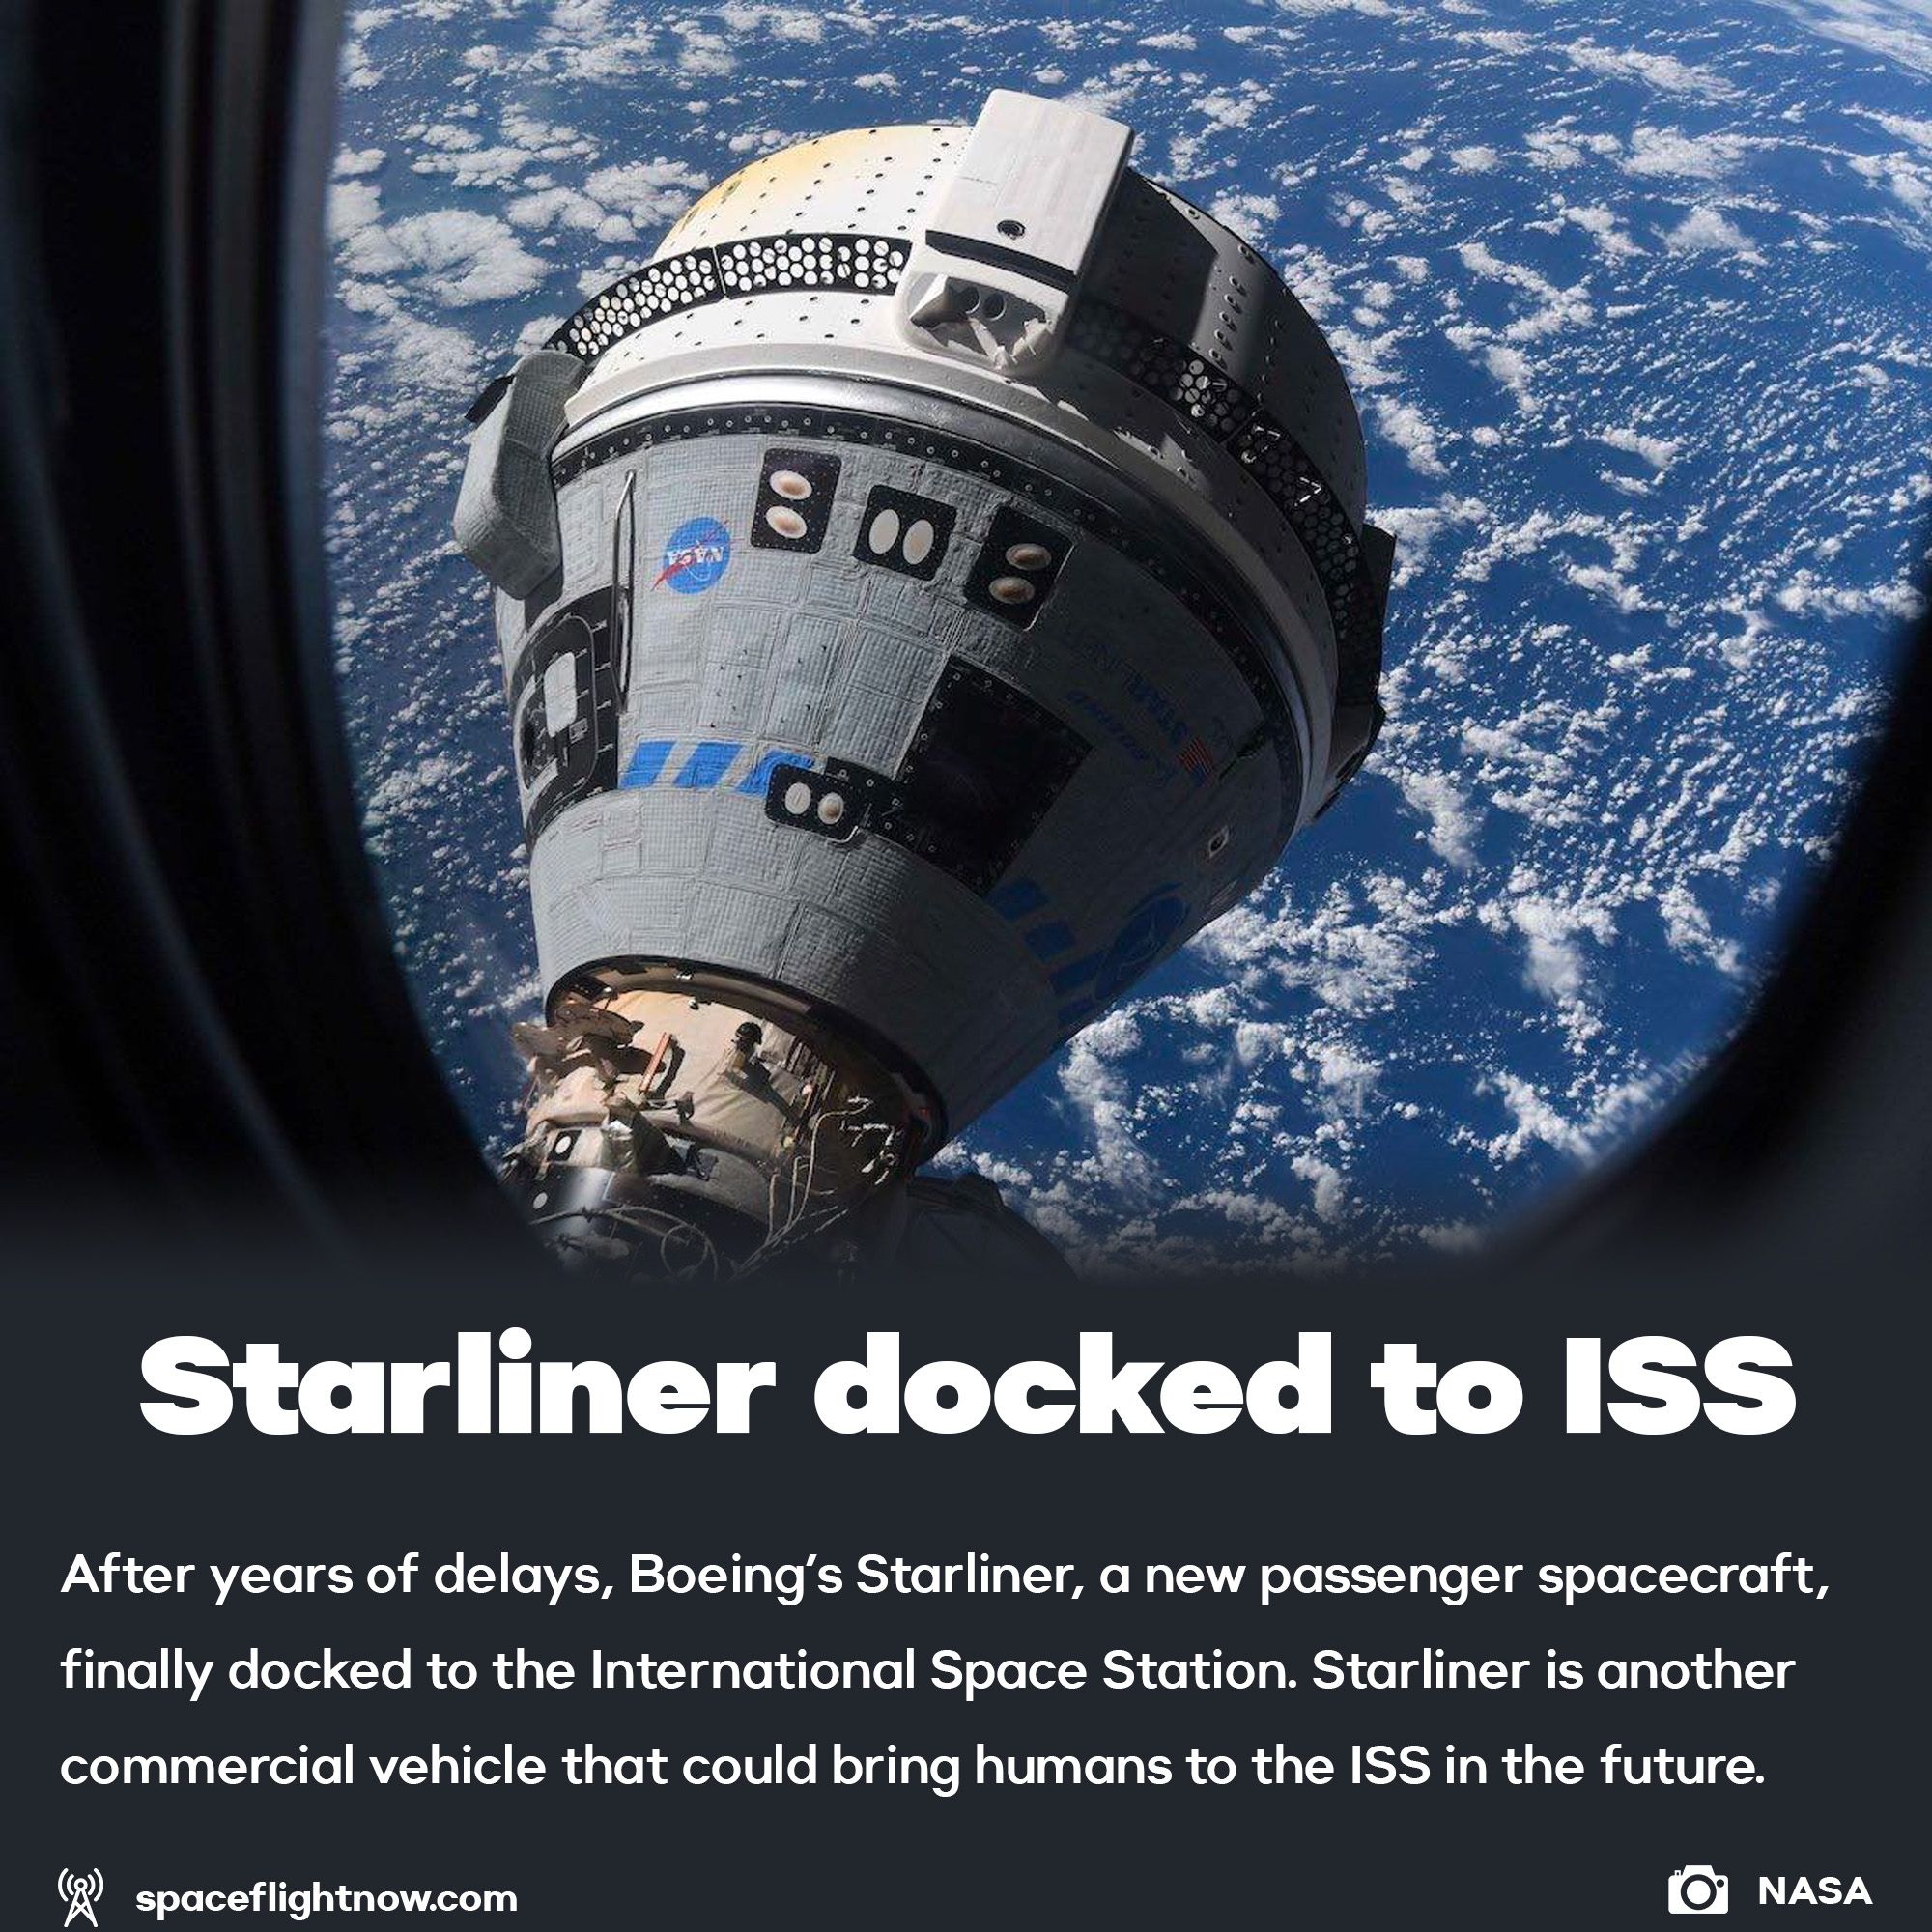 Boeing Starliner docked to ISS